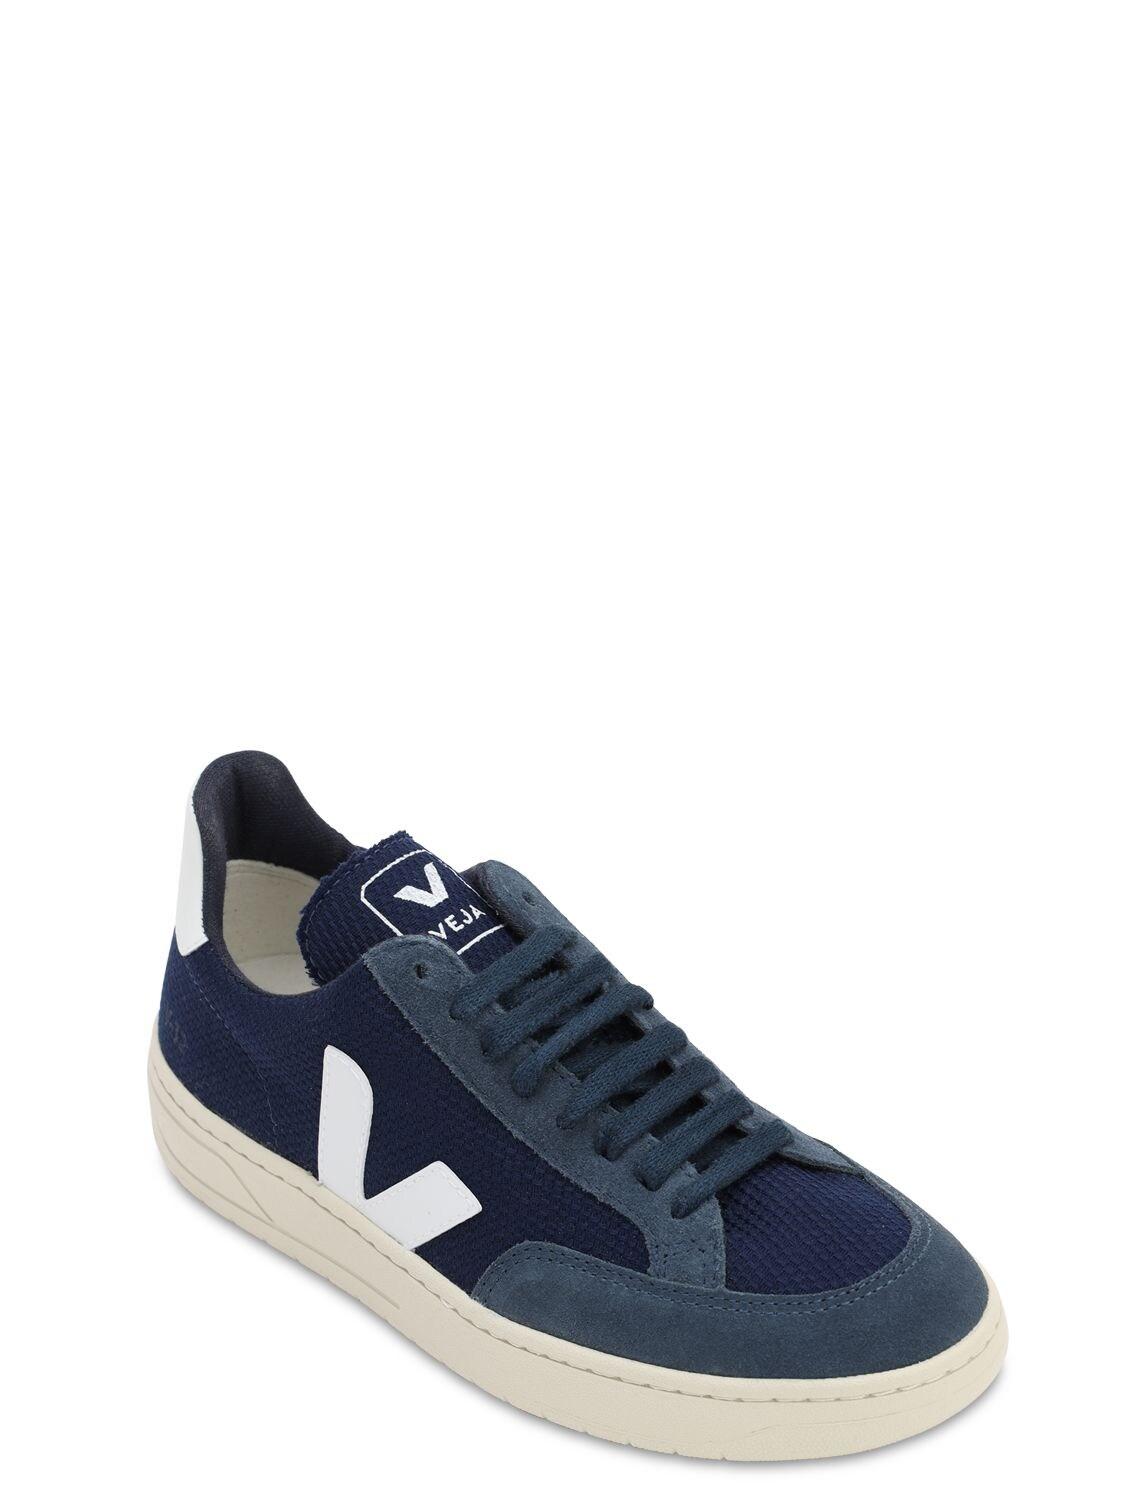 Vejas Synthetic 40mm V-12 Faux Leather Sneakers in Navy/White (Blue) - Lyst